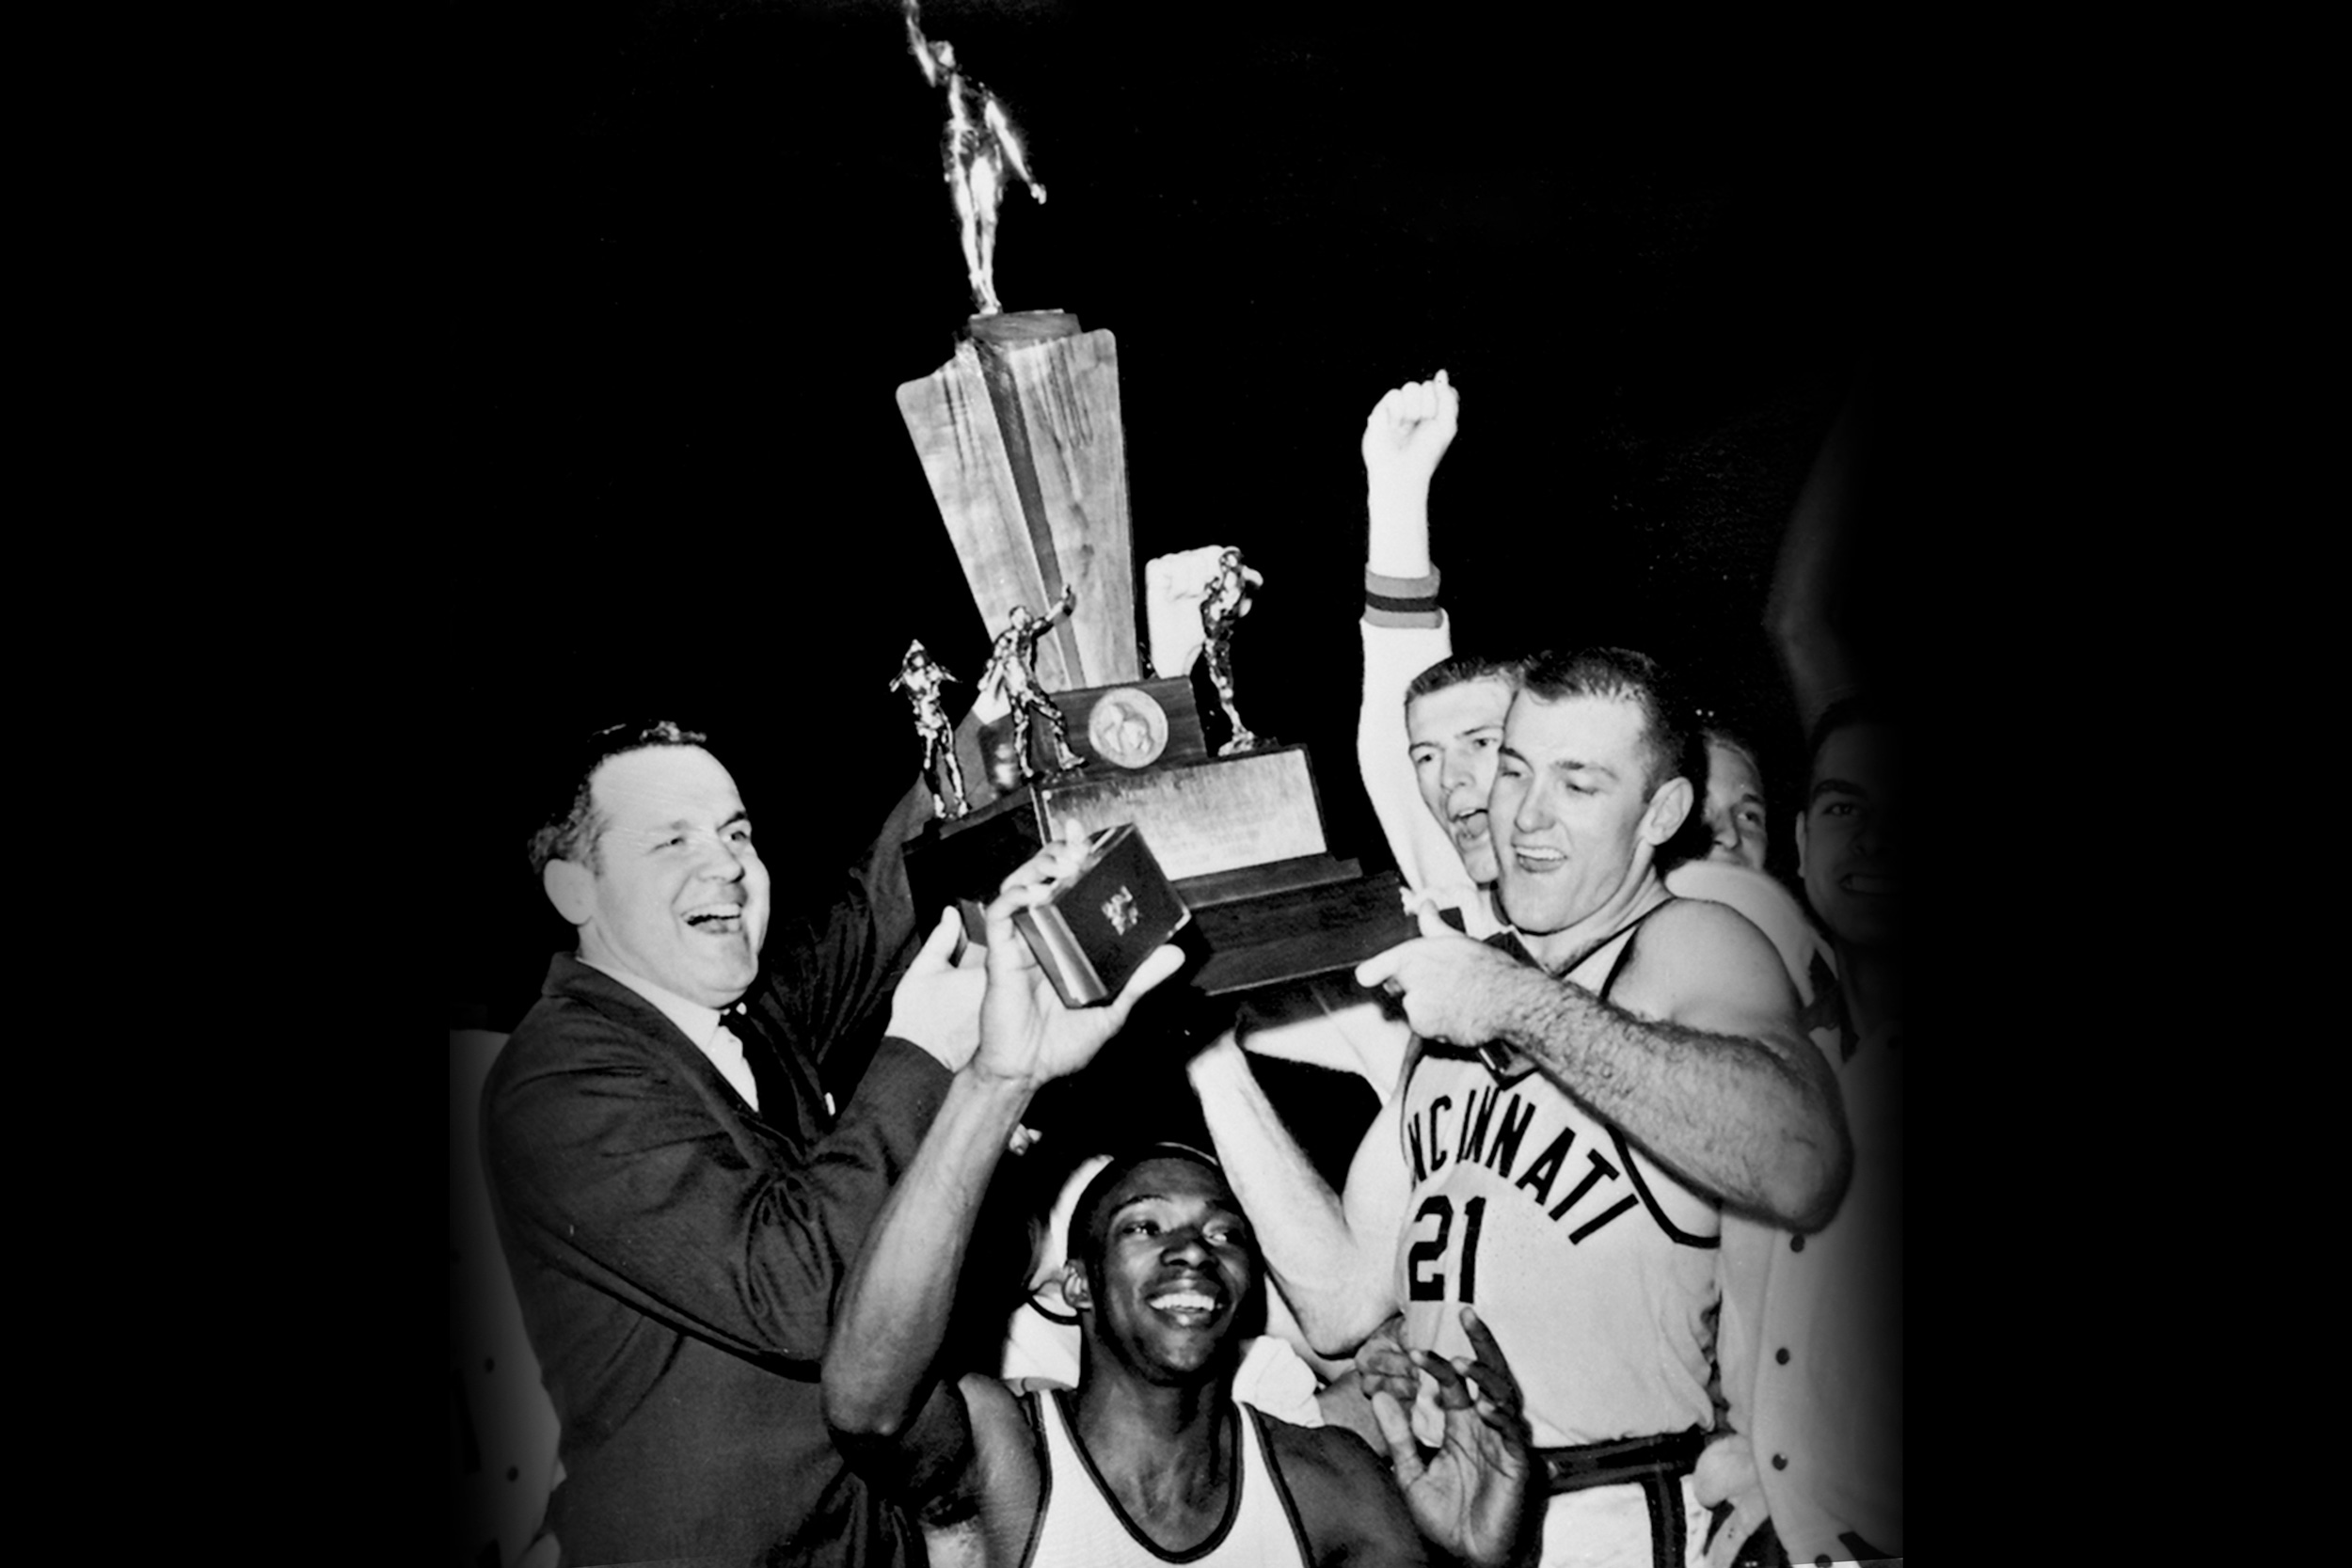 The 1961 Bearcats hoist the National Championship Trophy